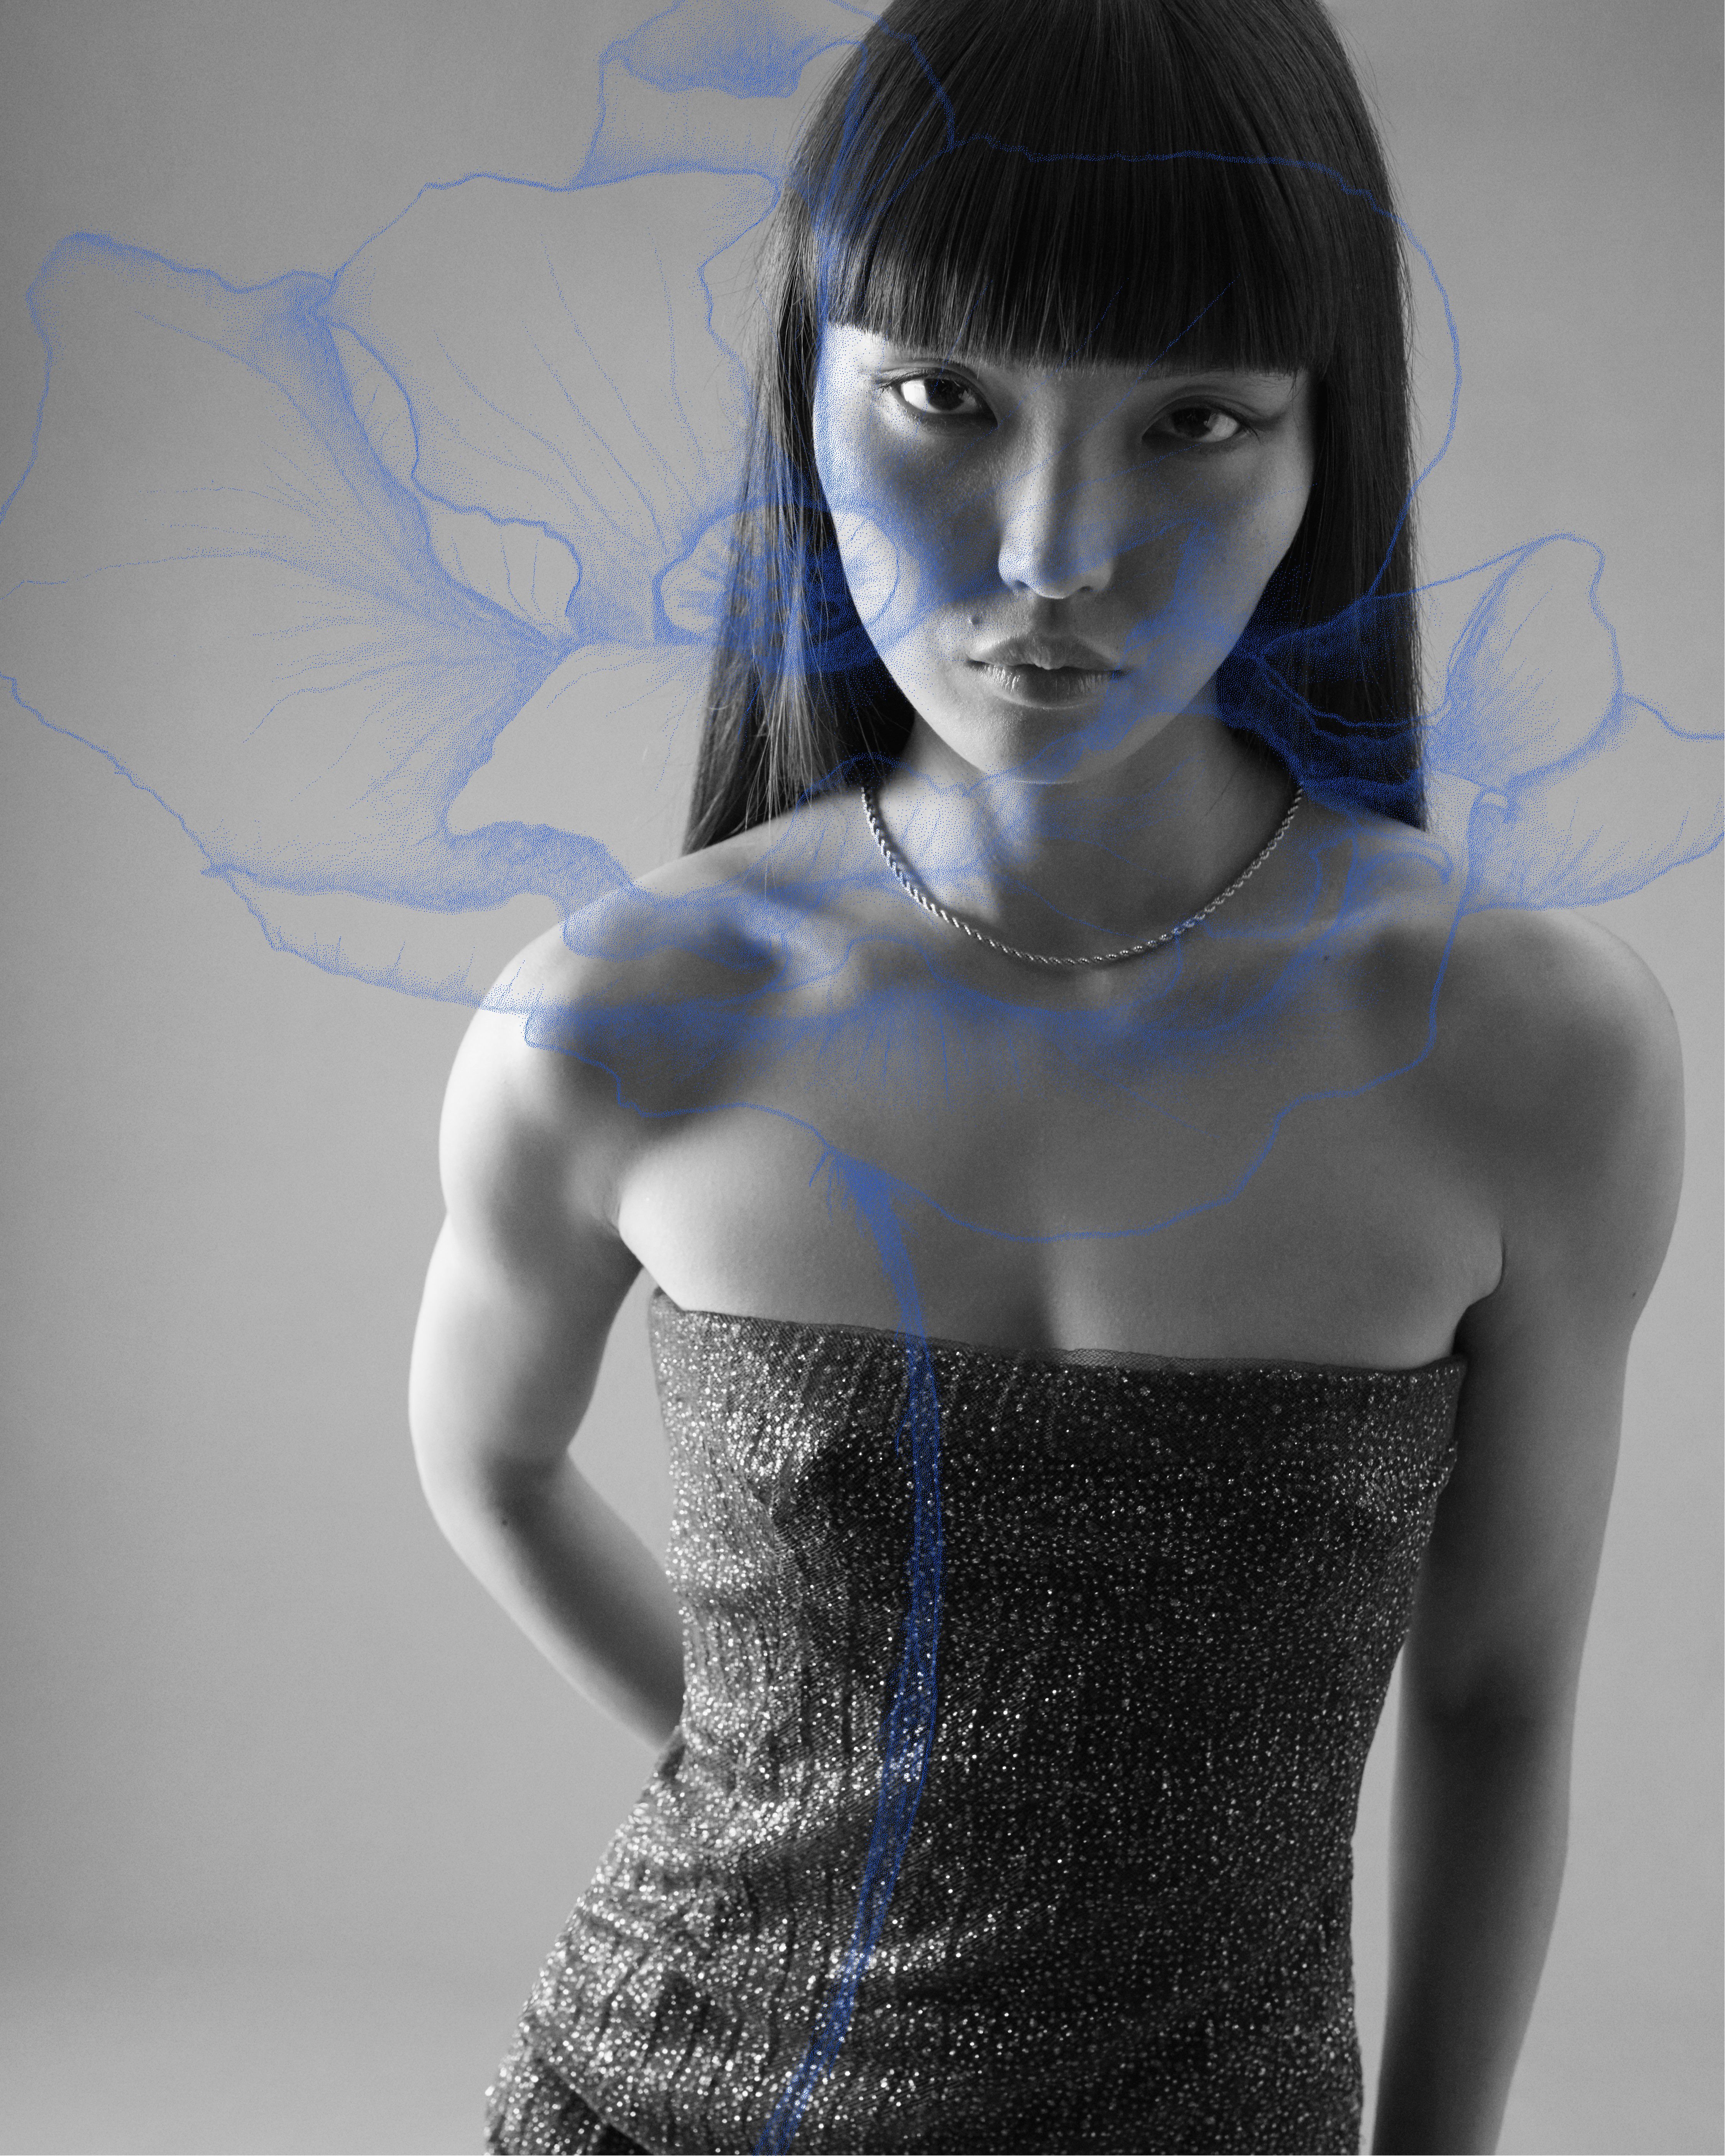 Black and white image of model gazing at camera in strapless dress with blue poppy illustration overlaid on top